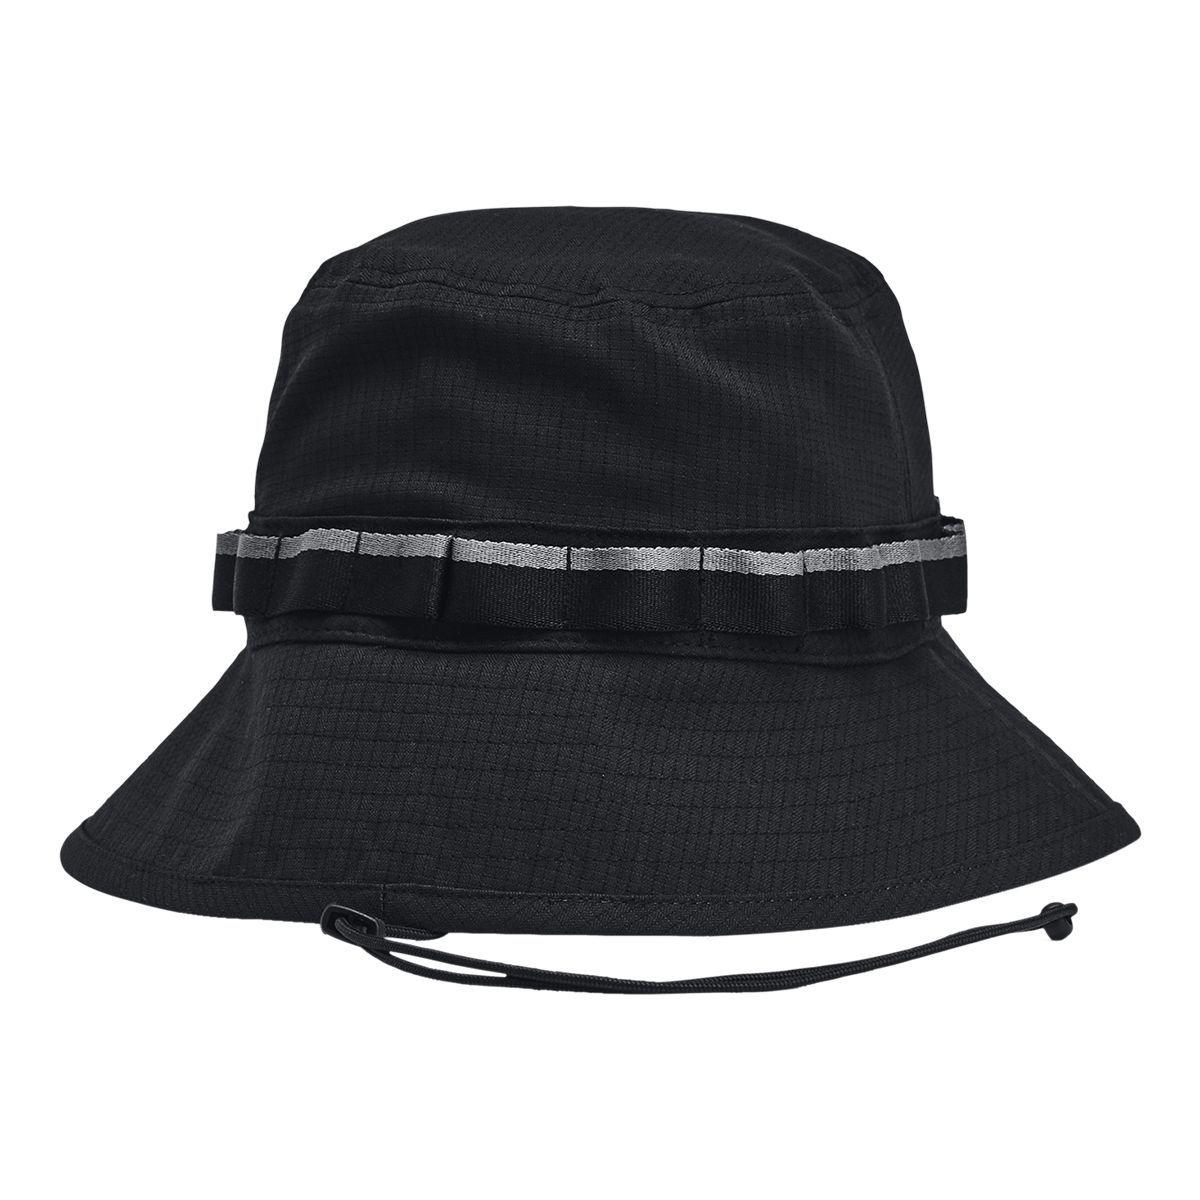 https://media-www.sportchek.ca/product/div-03-softgoods/dpt-79-clothing-accessories/sdpt-01-mens/334268714/under-armour-men-s-iso-chill-armourvent-bucket-hat-e787ae5a-95fc-4068-9c2a-0bba1065ab1a-jpgrendition.jpg?imdensity=1&imwidth=1244&impolicy=mZoom